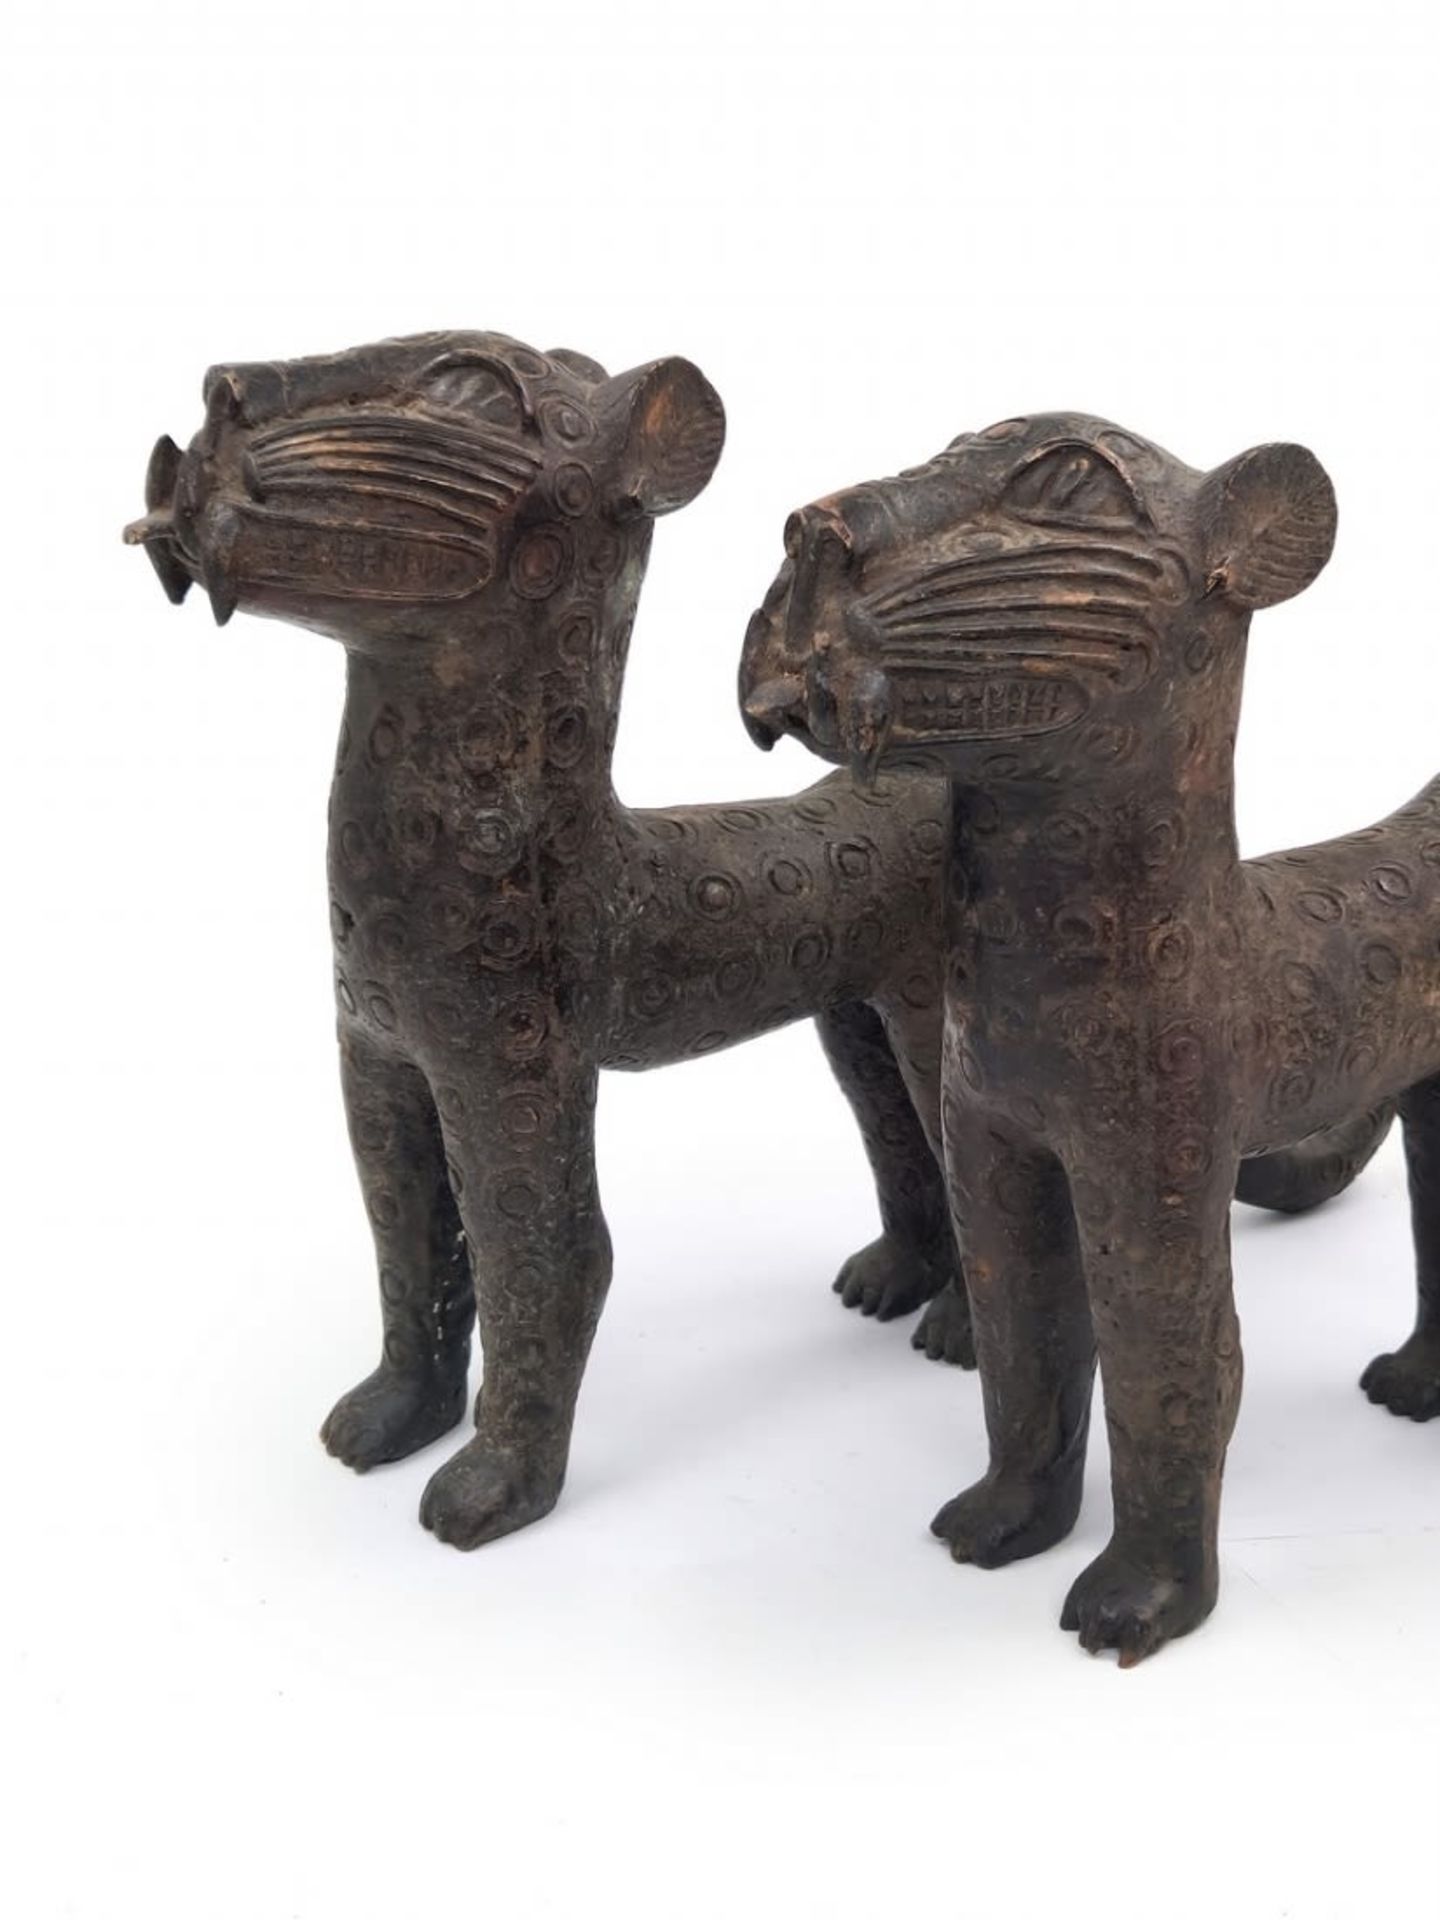 A pair of antique African statues, around hundred years old, in the form of panthers, made in ' - Image 4 of 8